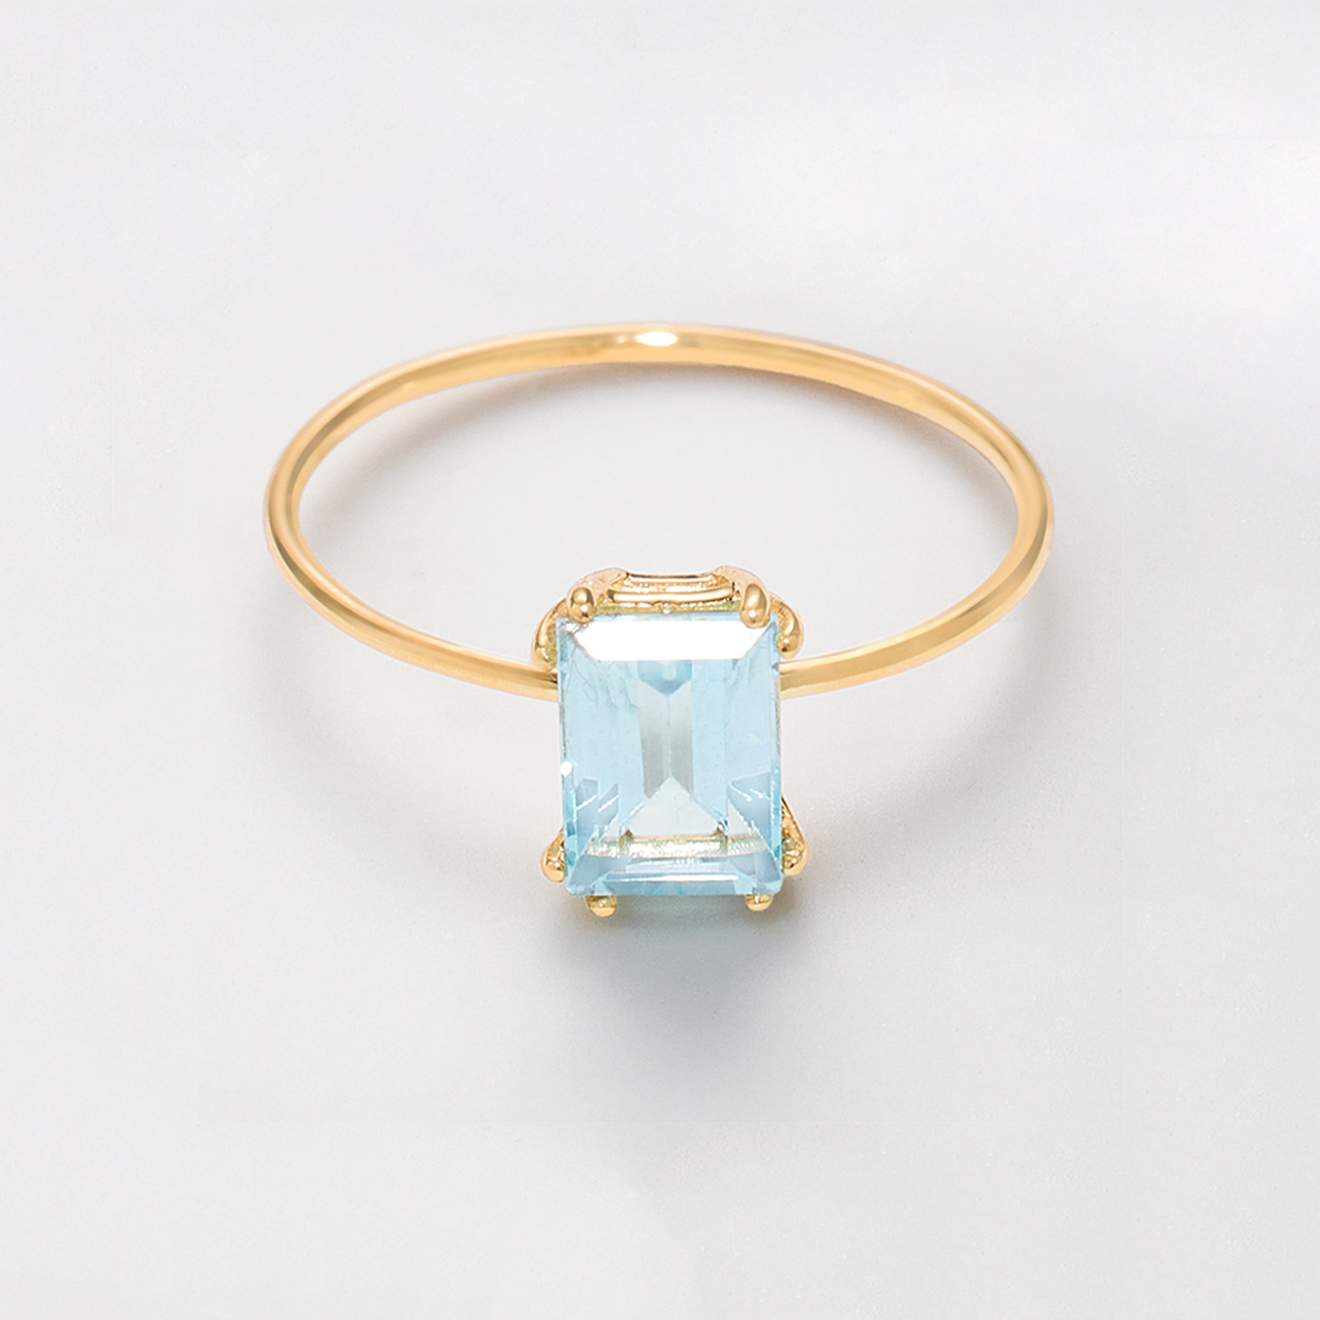 by colette - bague alicia topaze 0.93 ct or jaune